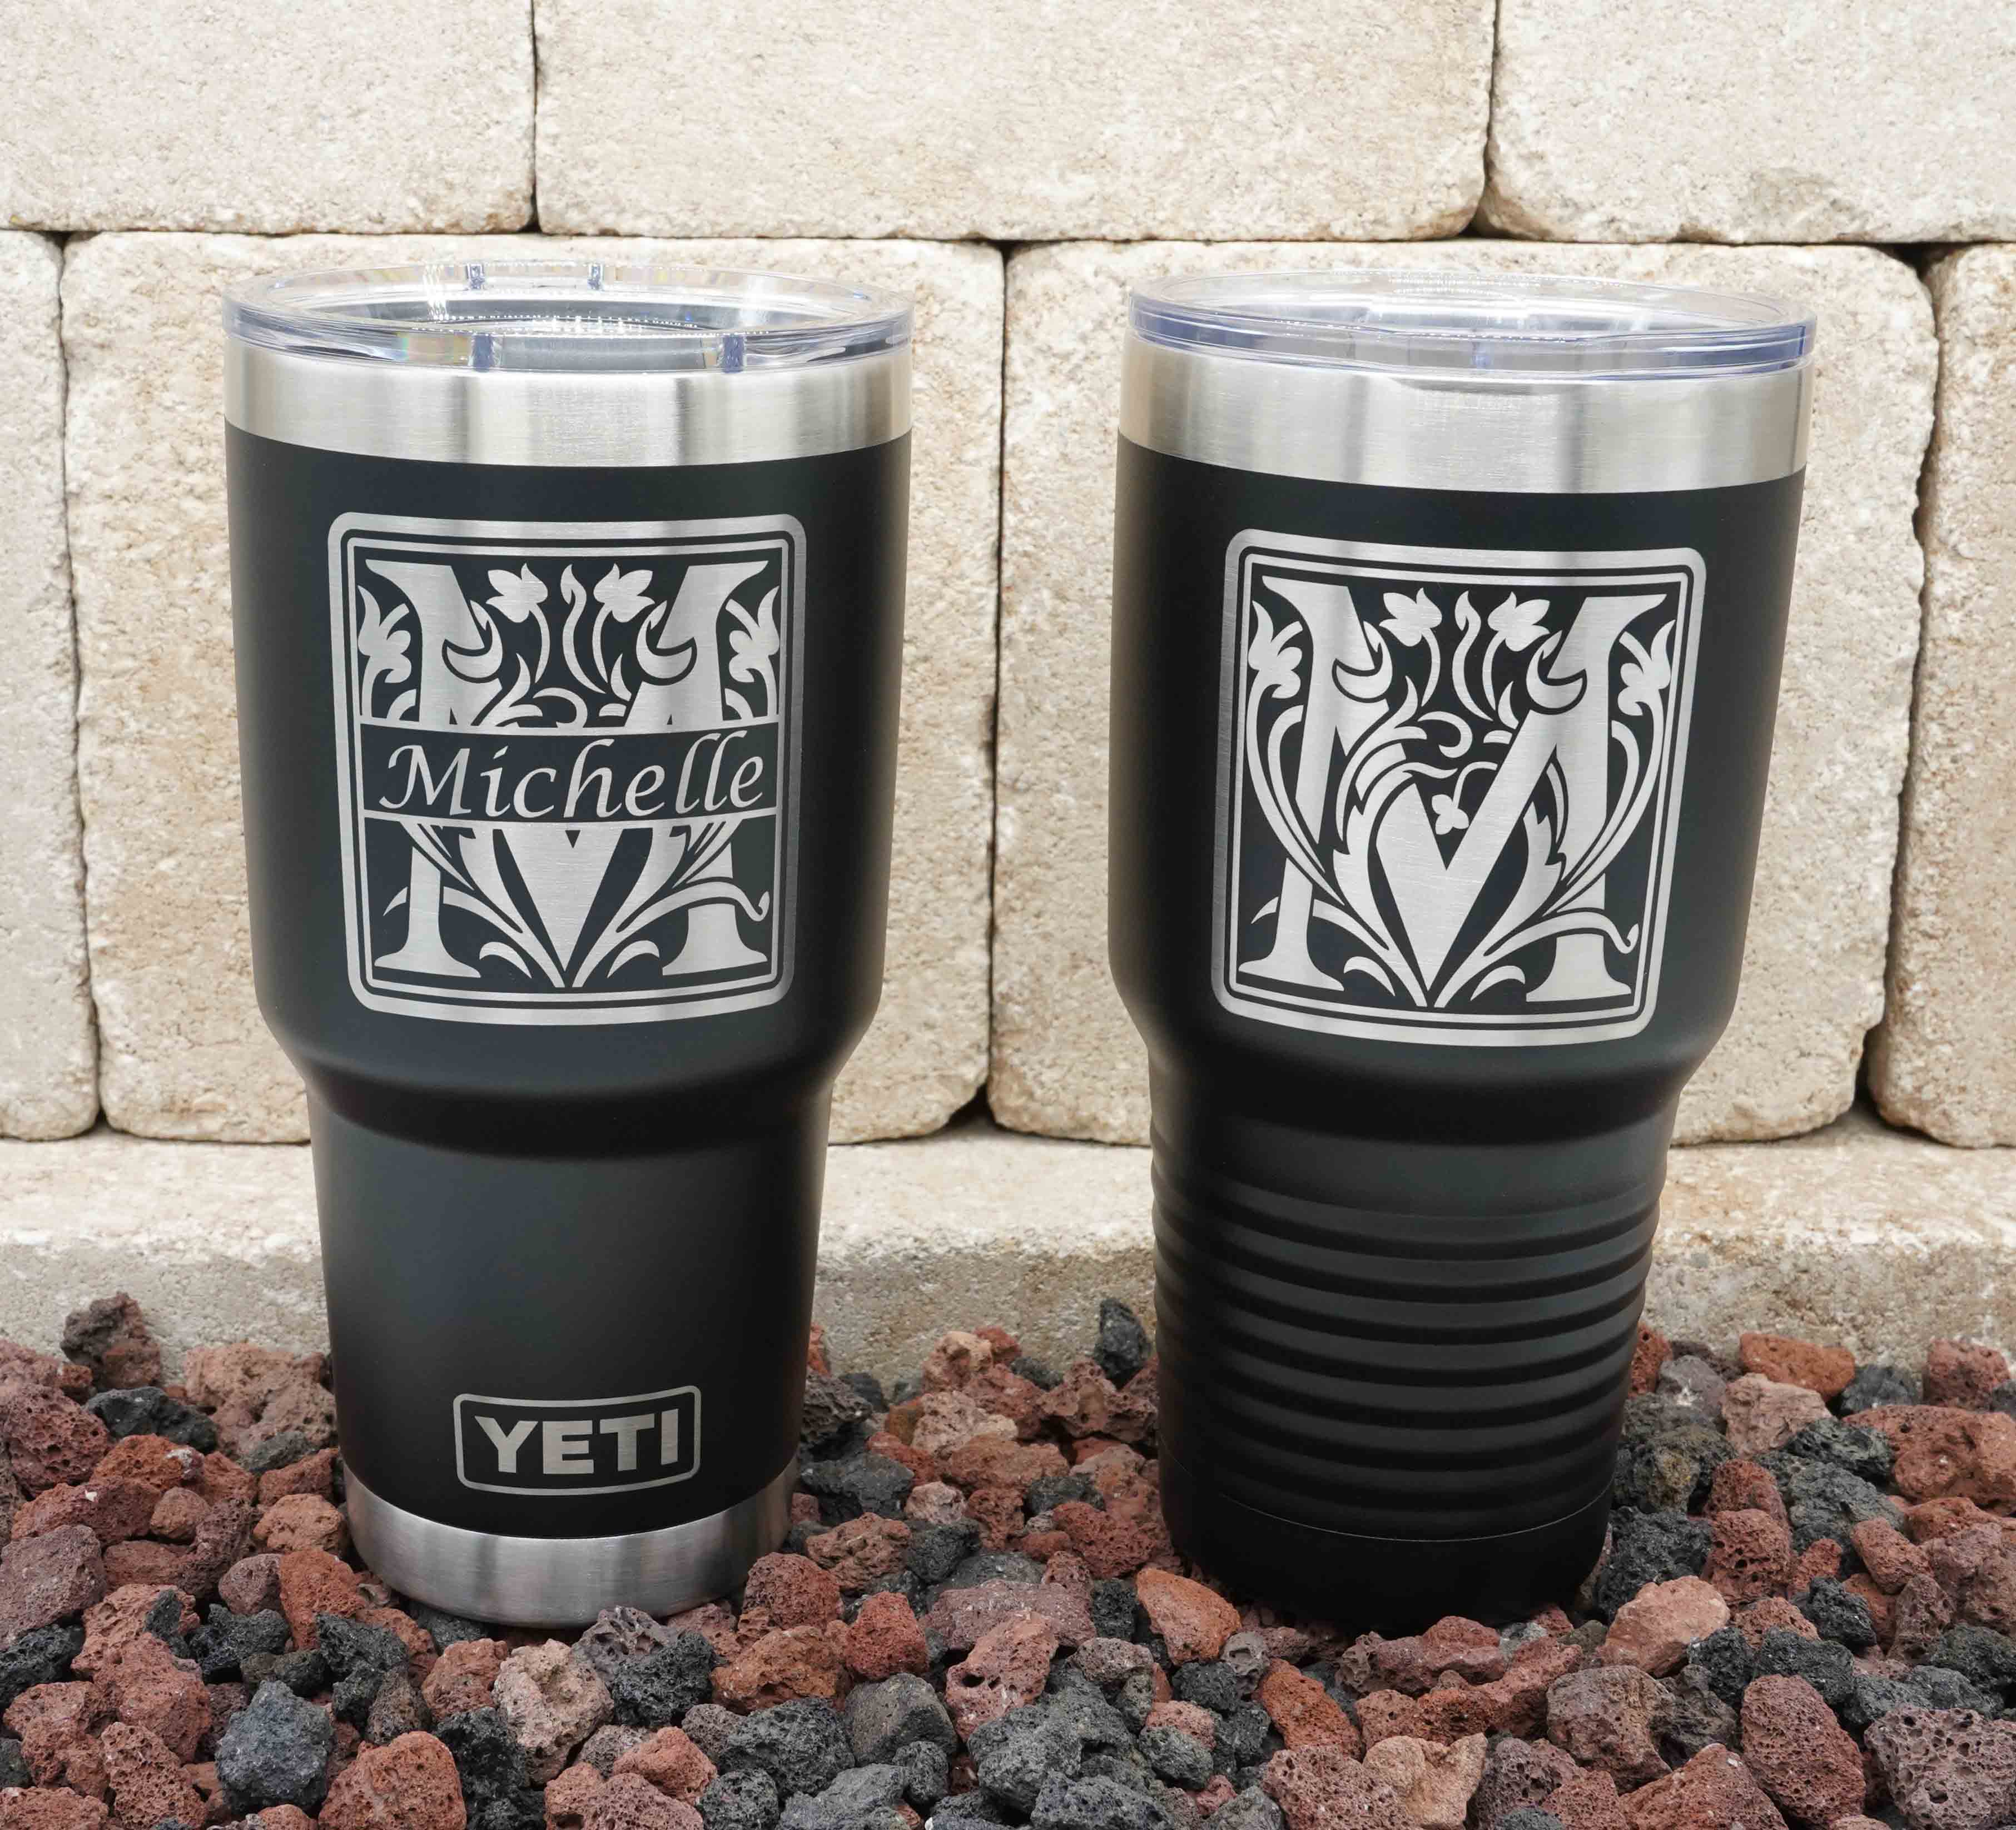 Laser Engraved YETI® or Polar Camel Water Bottle with Toolbox Diamond